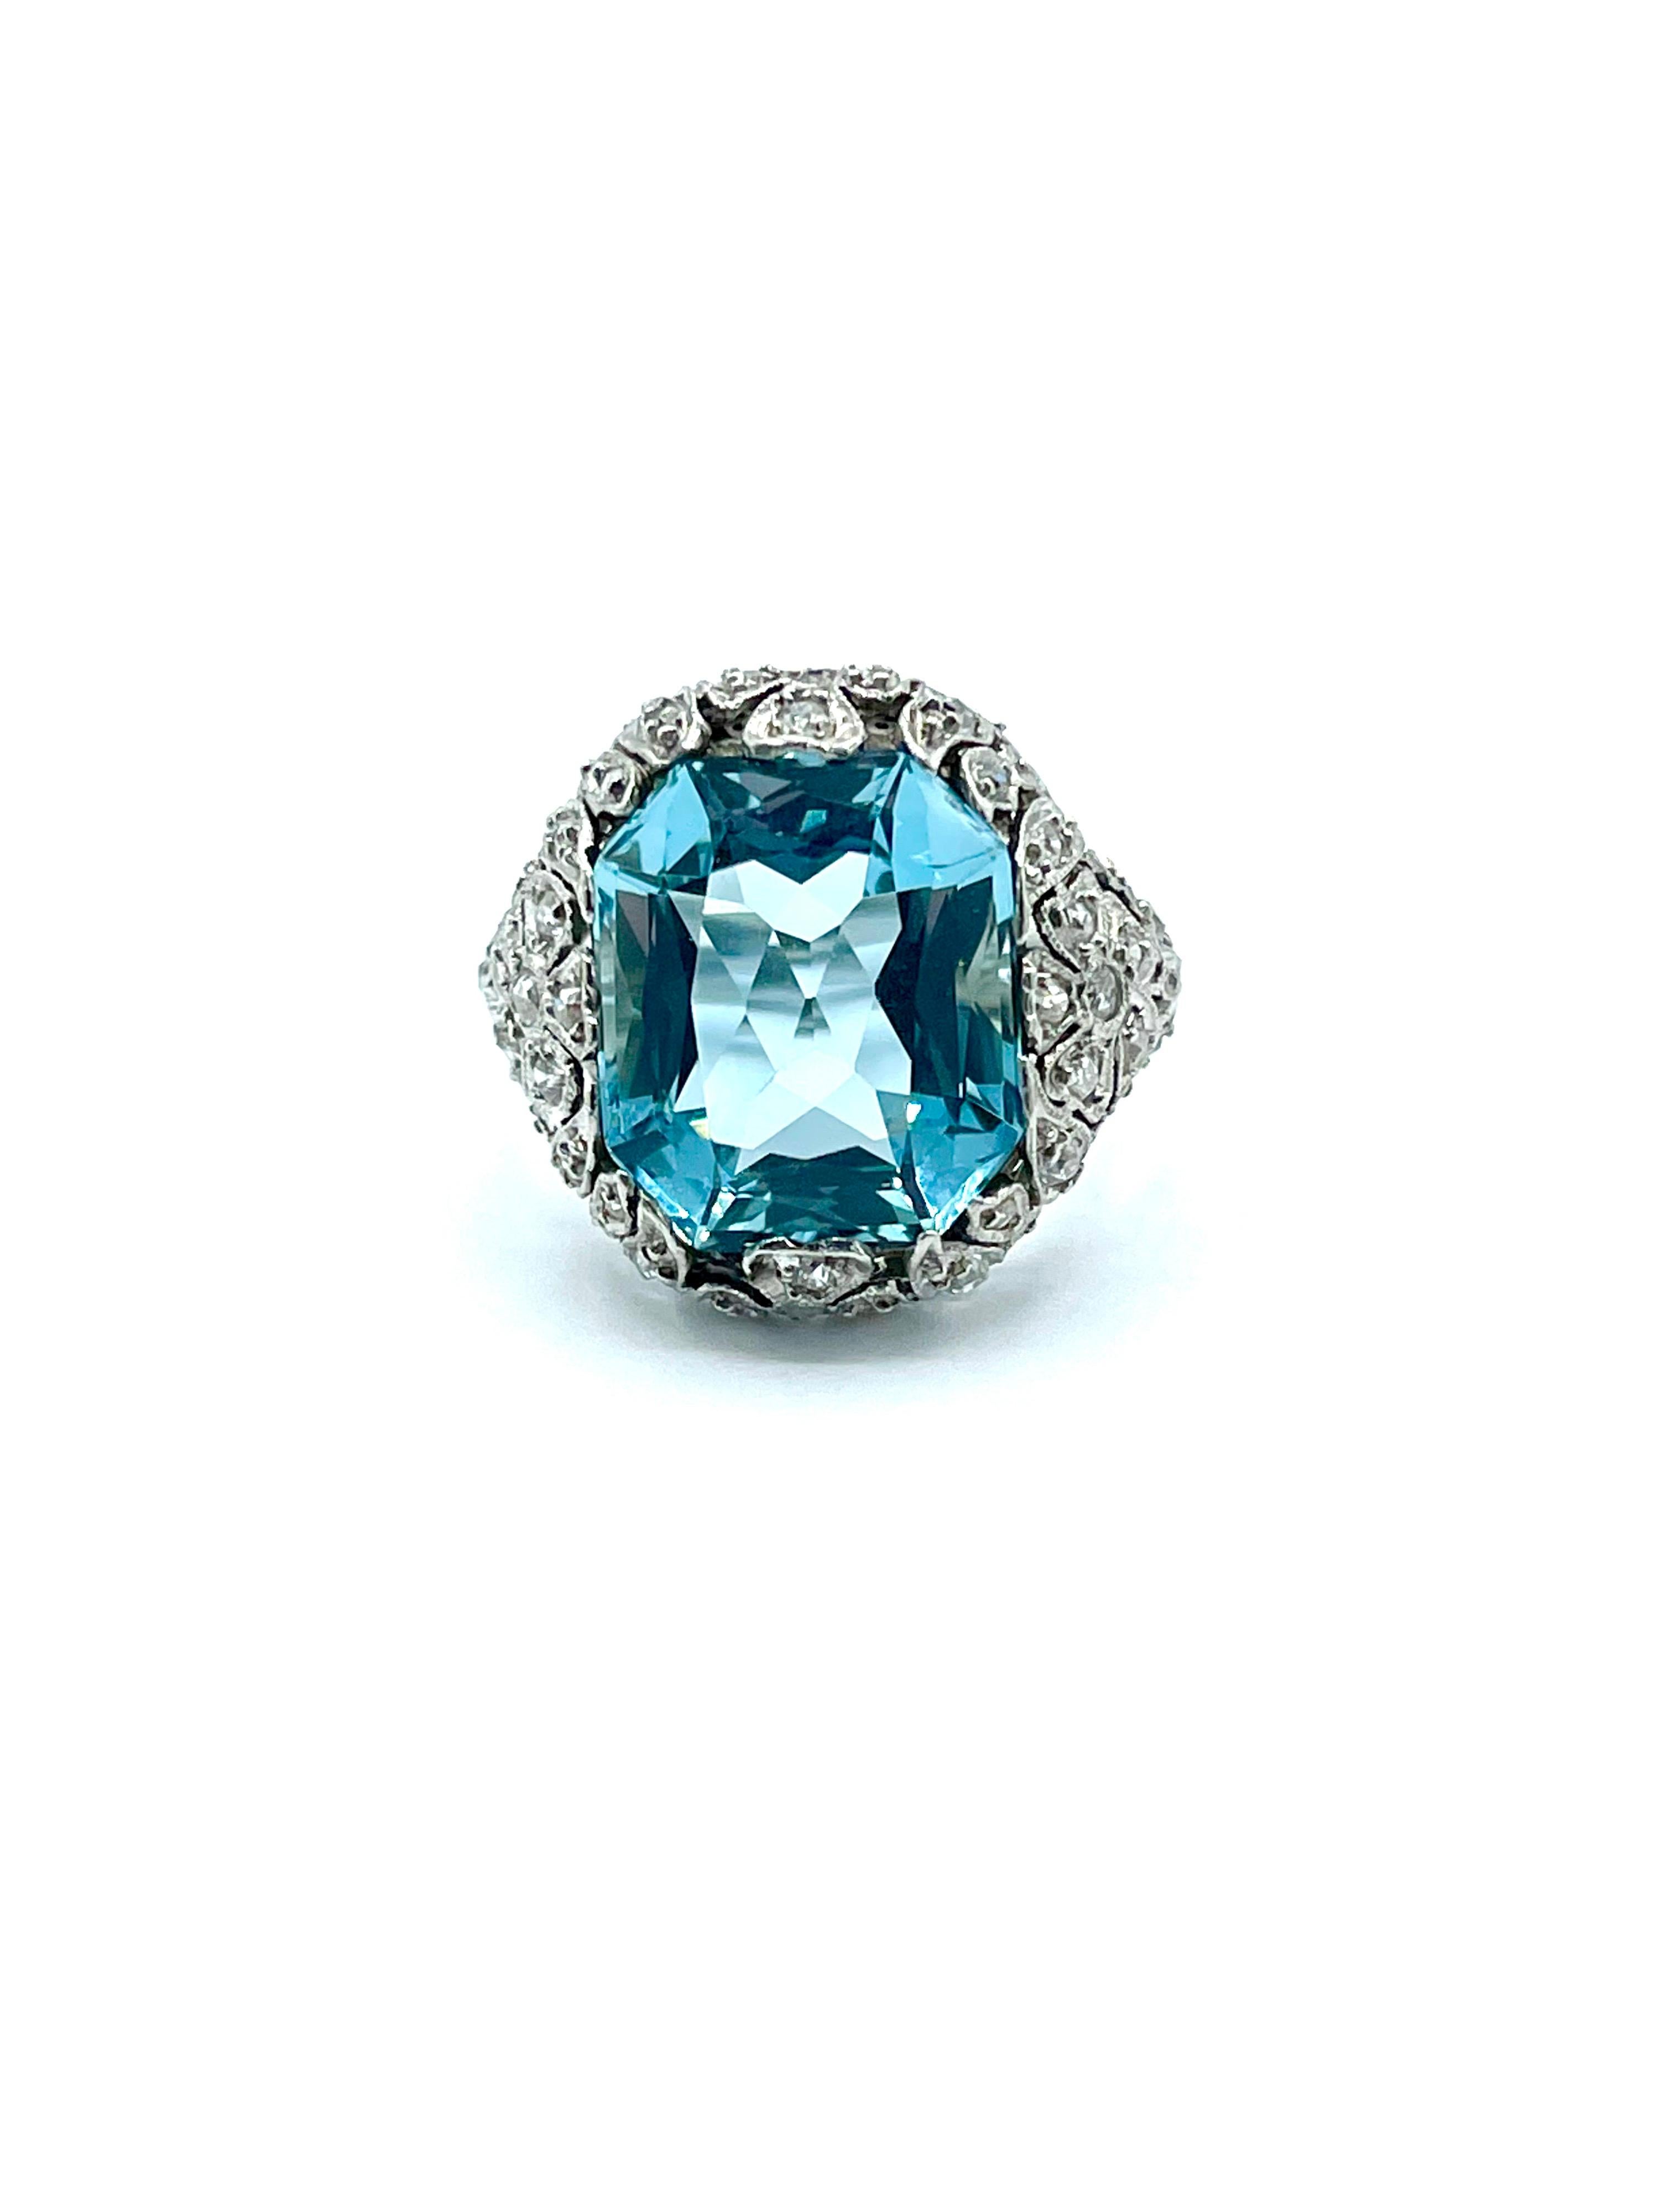 This is an absolute stunner!  The 8.95 carat Aquamarine displays great brilliance with a beautiful color and hue.  It is set in a platinum Diamond filigree mounting of the Art Deco era.  There is 1.00 carat total weight of Diamonds.  The ring is